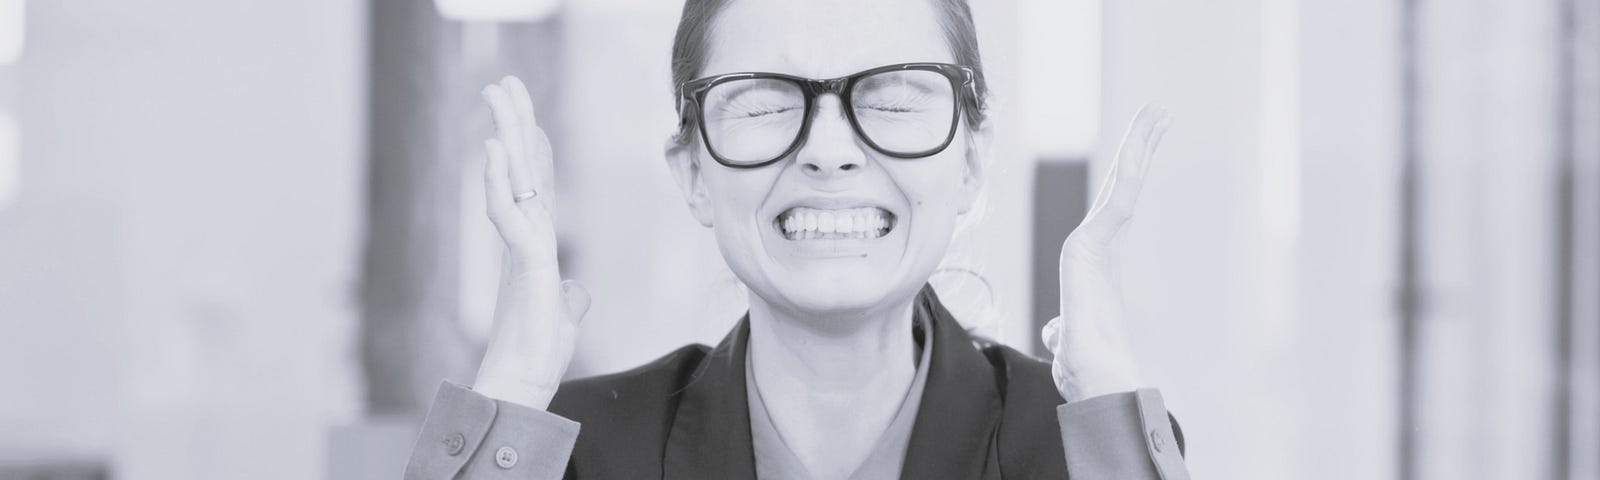 Woman in a suit and glasses with a grimace on her face and her hands held up as if she is completely dumfounded.